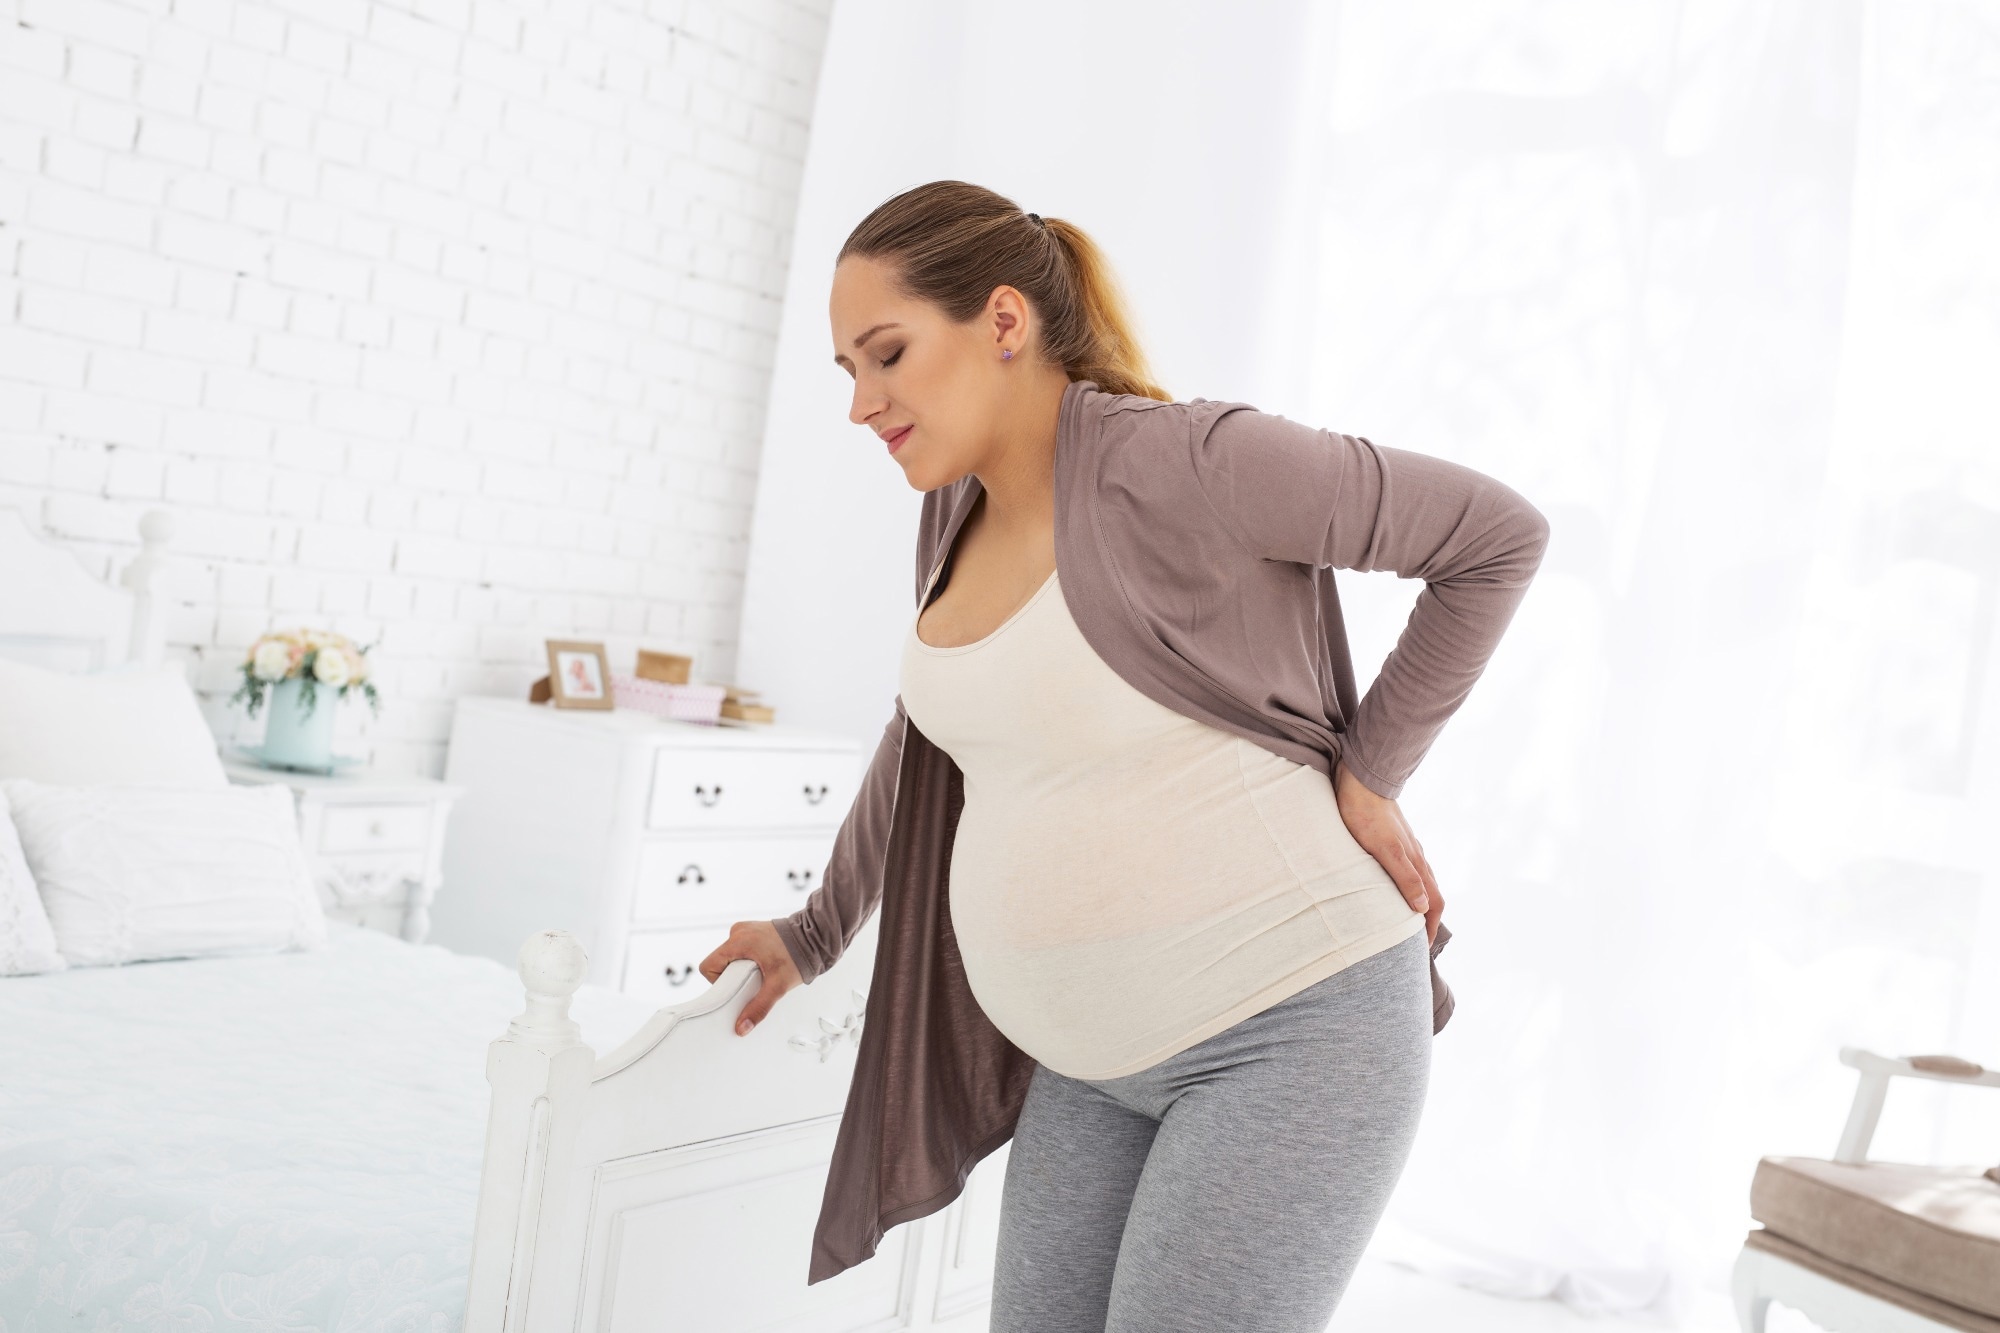 Study: Acupuncture for low back and/or pelvic pain during pregnancy: a systematic review and meta-analysis of randomised controlled trials. Image Credit: YAKOBCHUK VIACHESLAV/Shutterstock